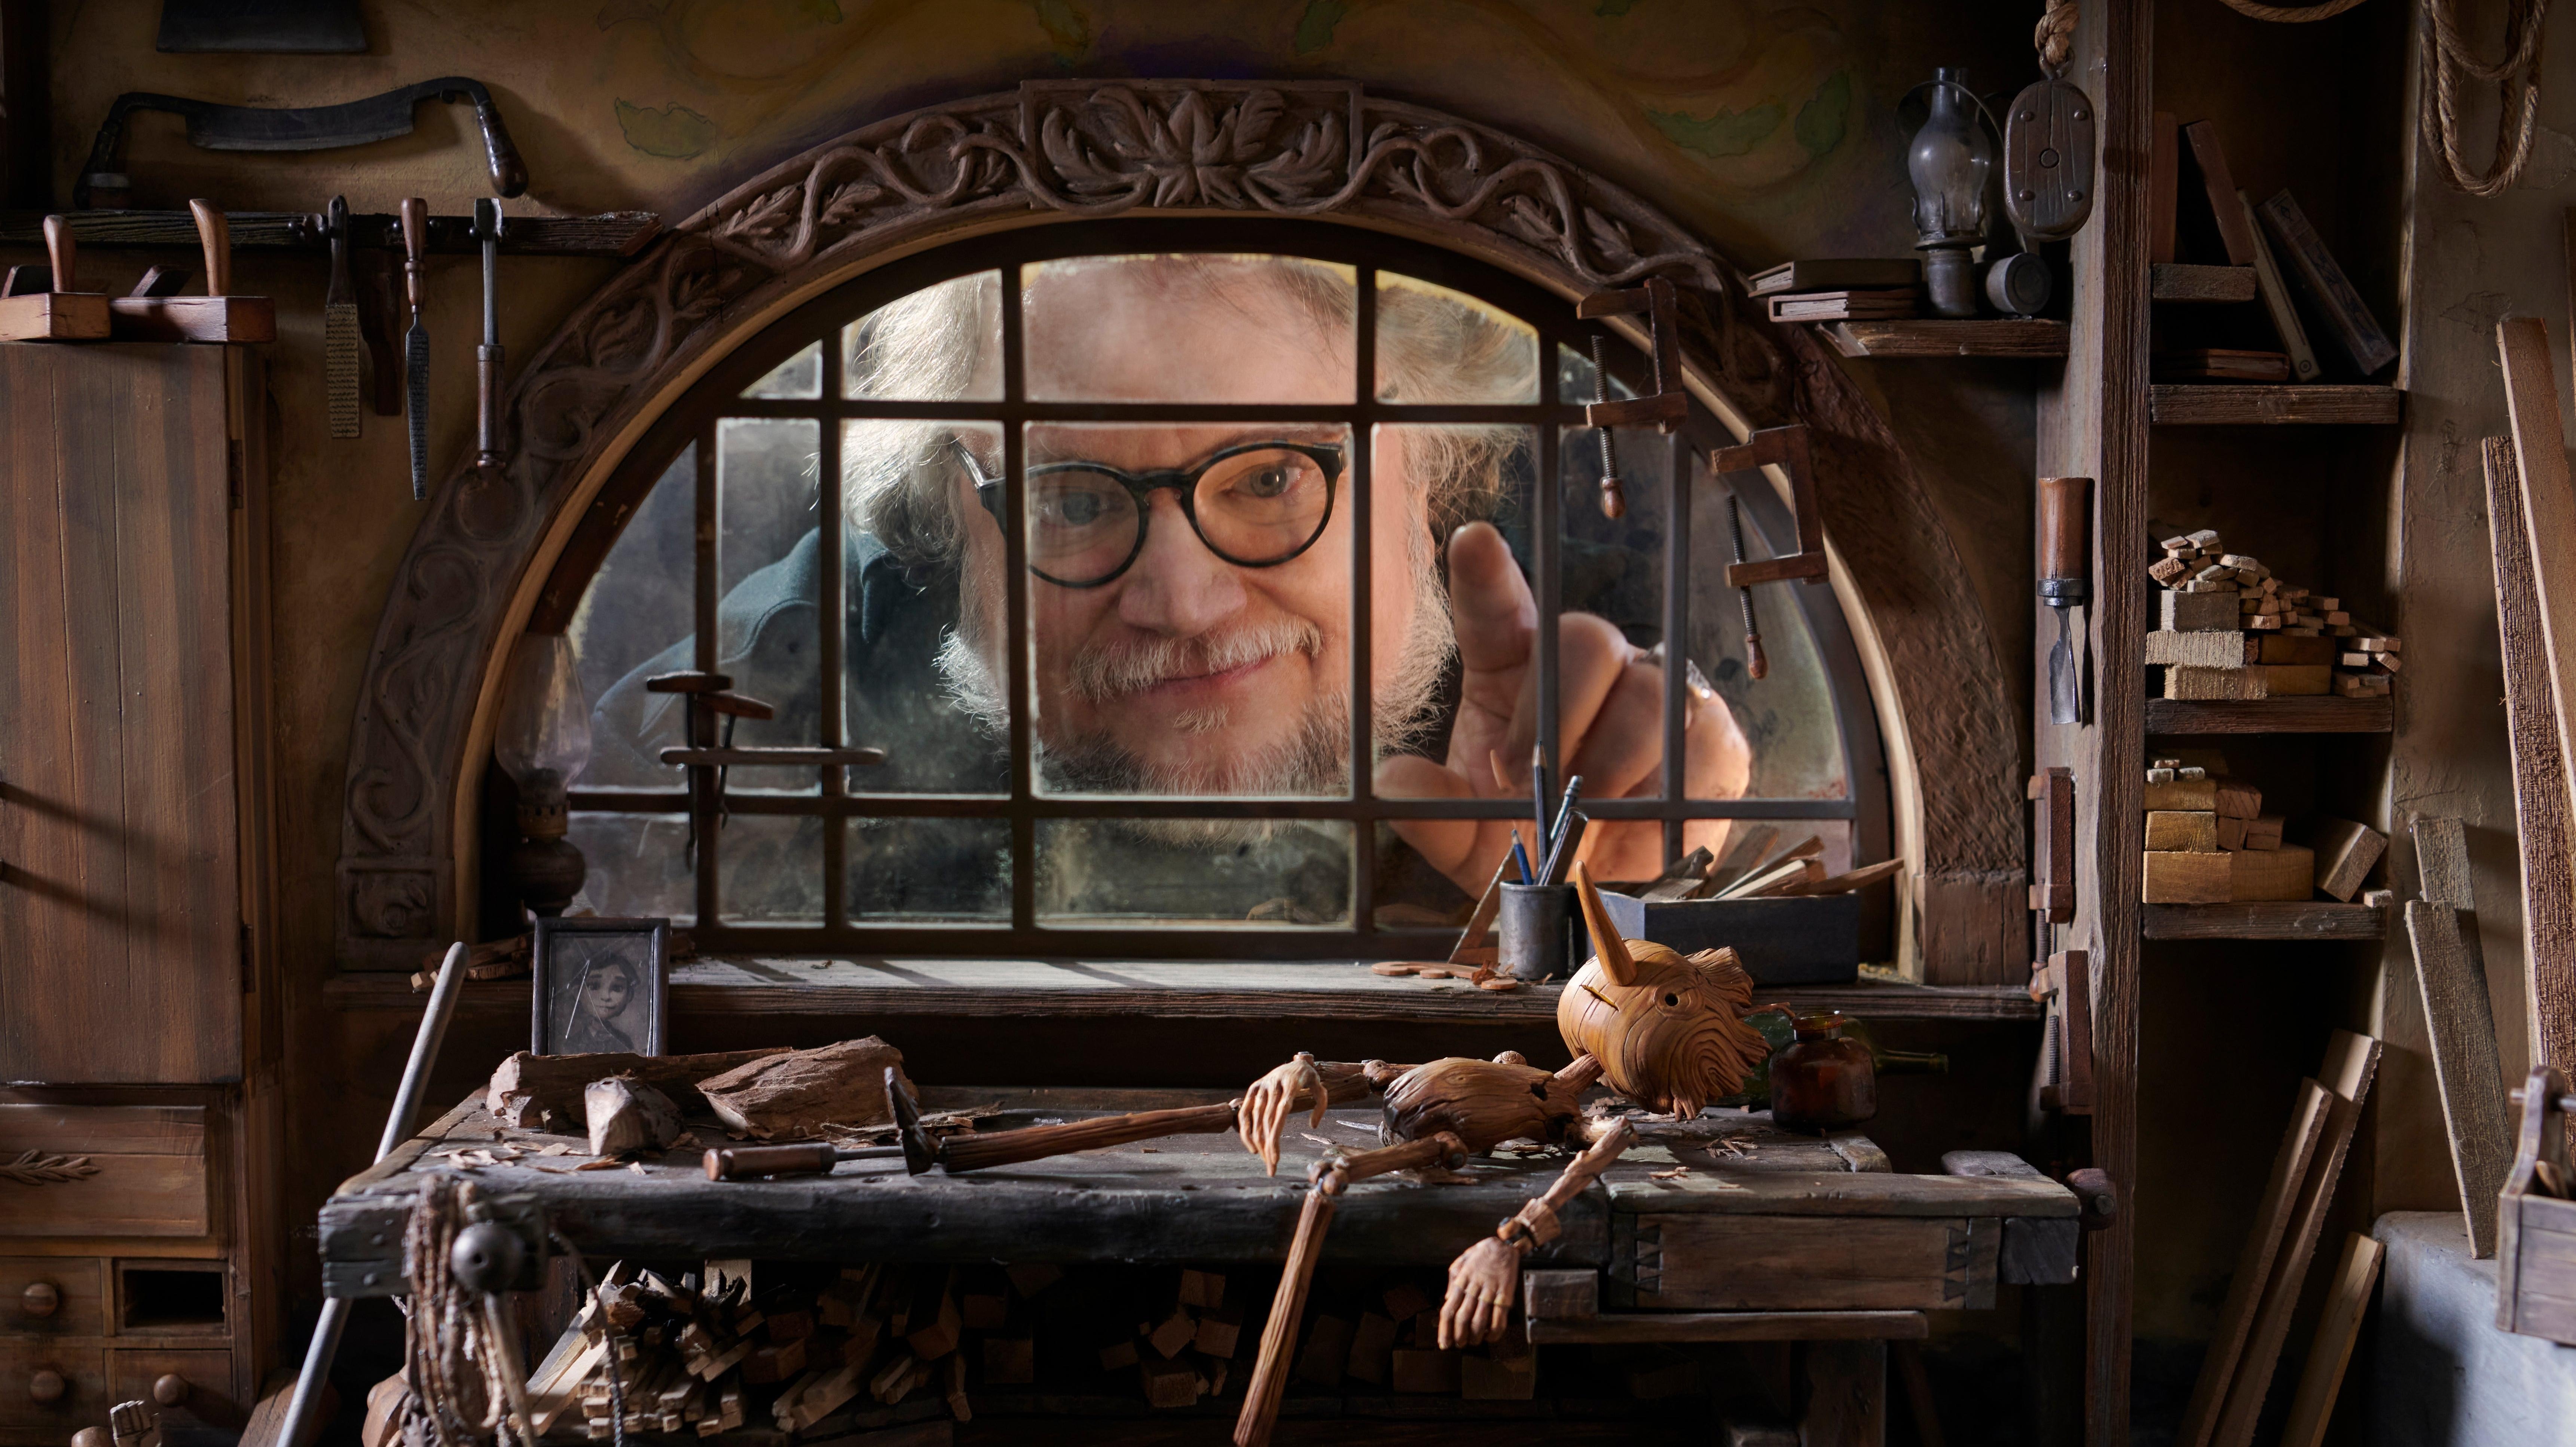 Holy crap, the behind-the-scenes stuff on Guillermo Del Toro’s Pinocchio looks cool